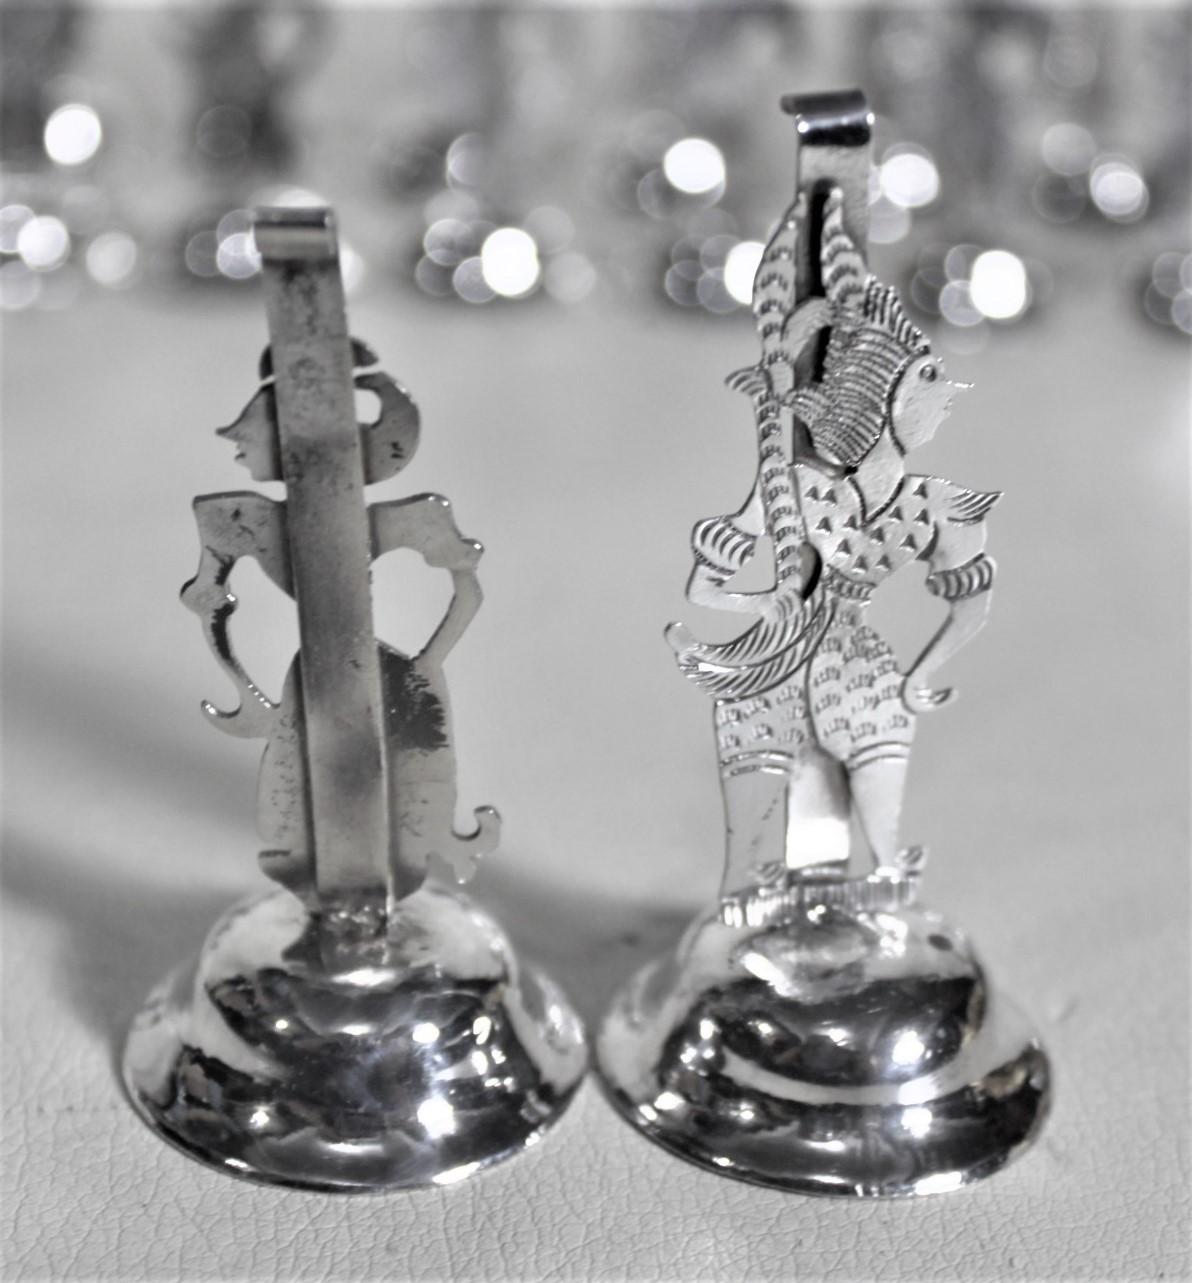 Set of 24 Thai or Tibetan Silver Plated Dancer Place Card or Menu Holders In Good Condition For Sale In Hamilton, Ontario